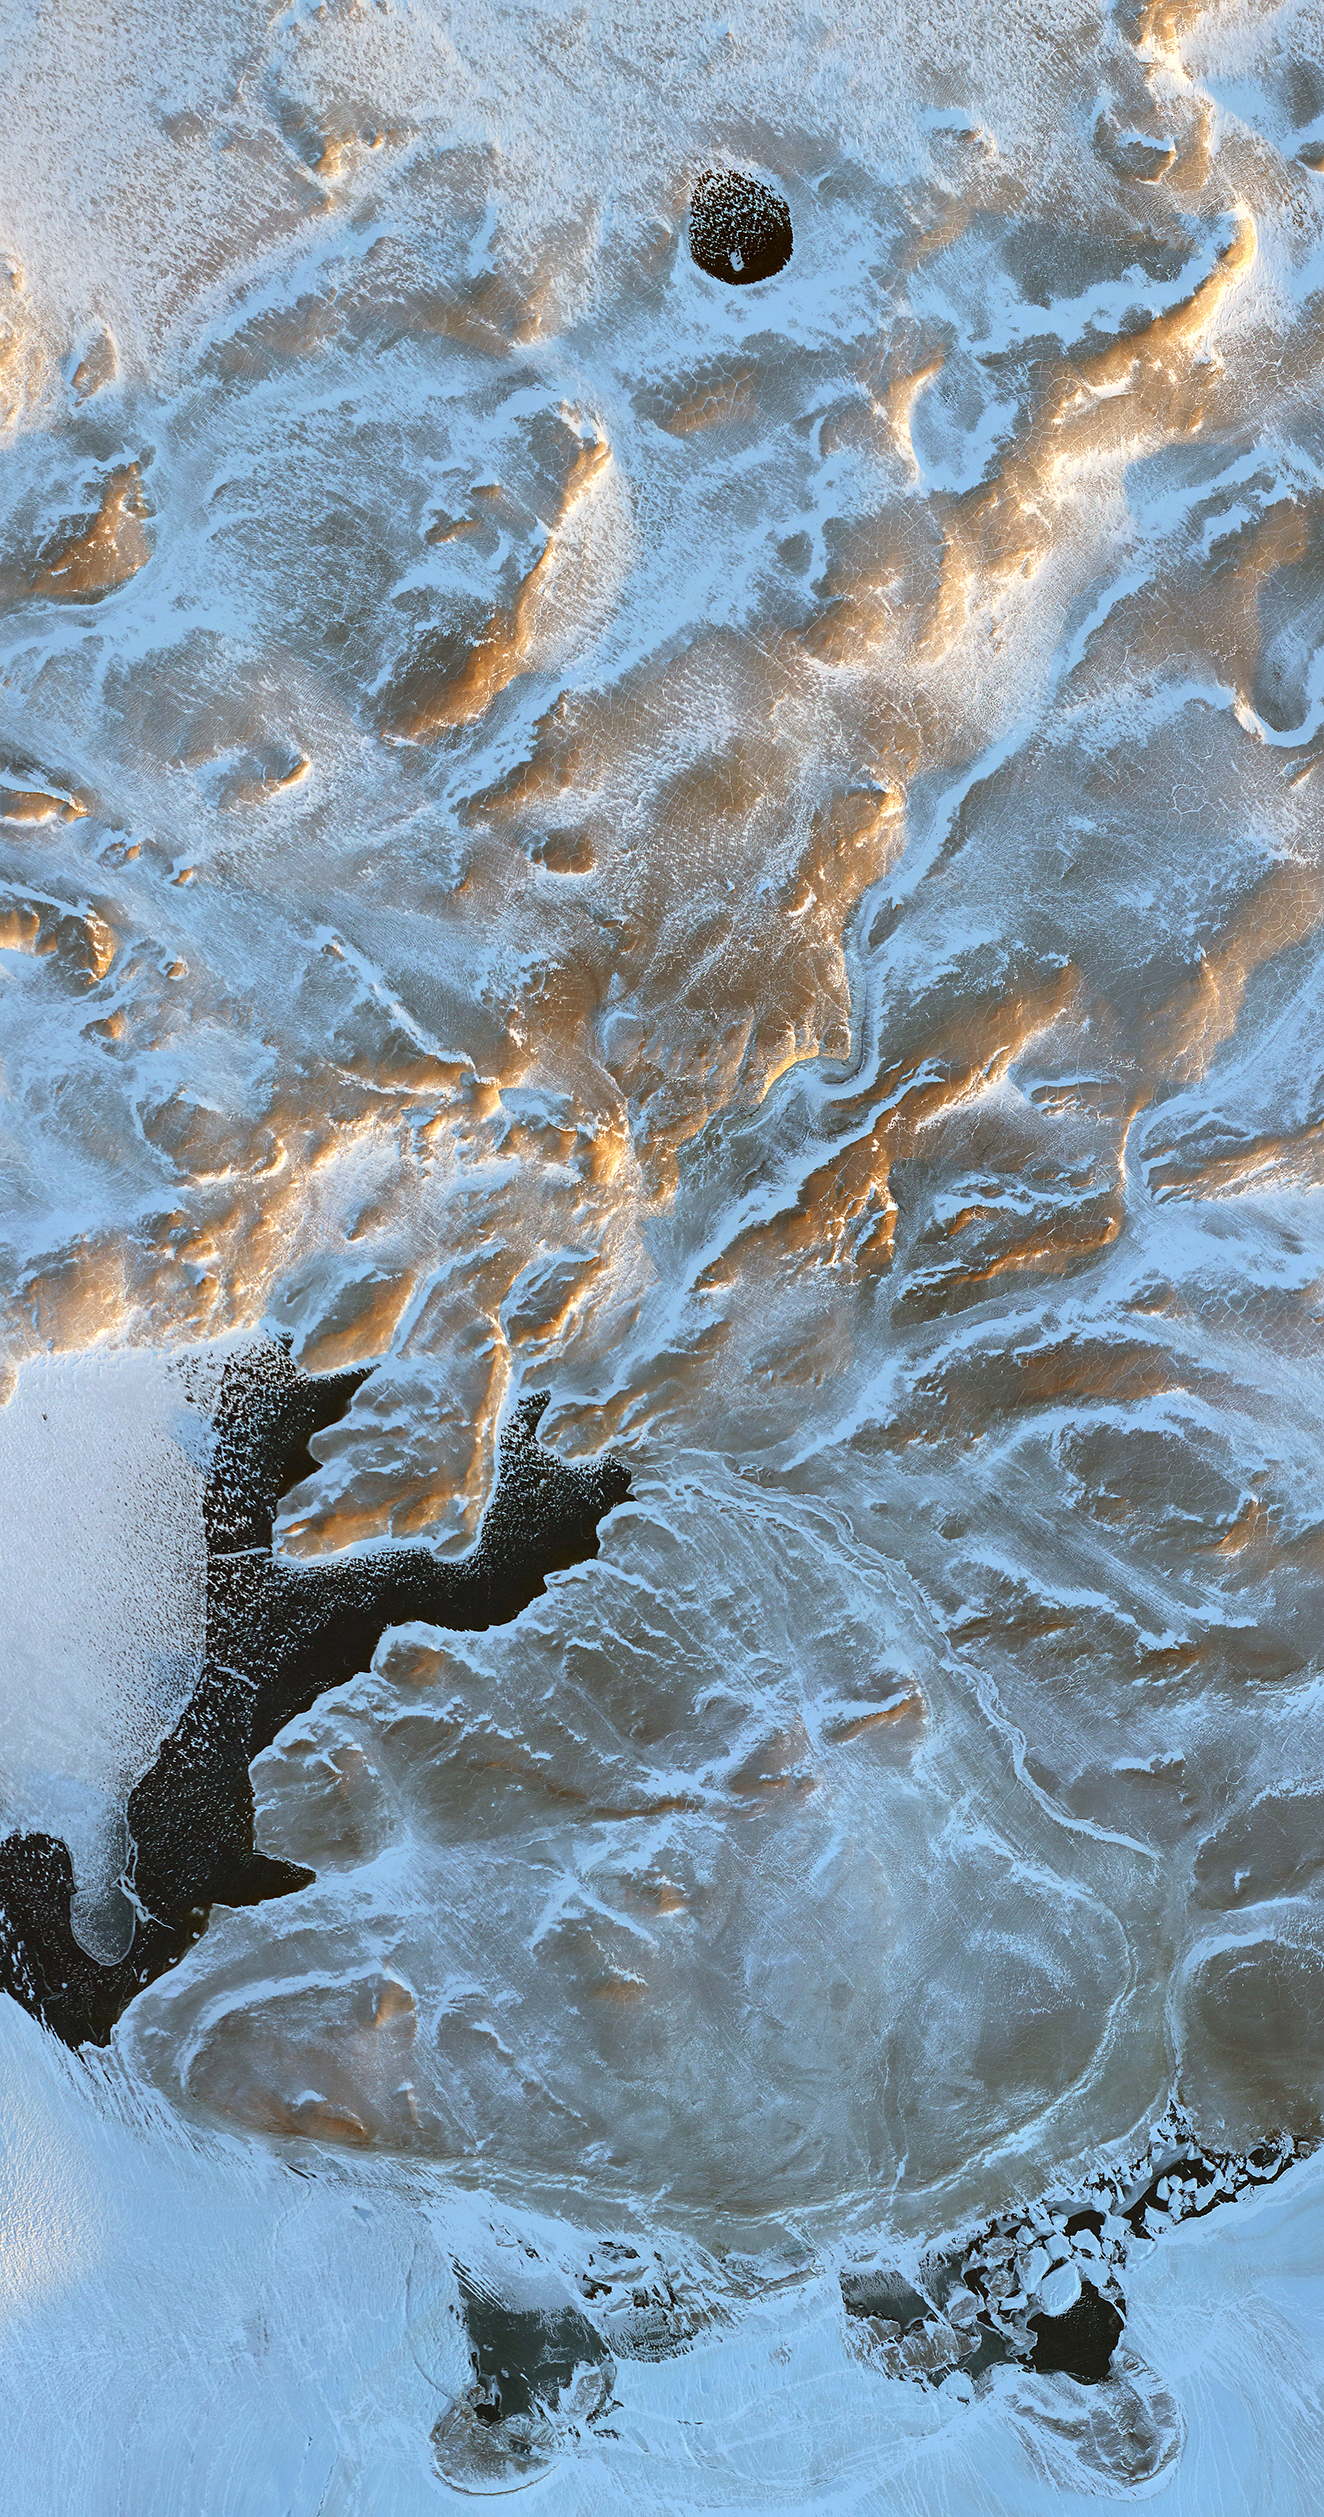 Daugaard-Jensen Land, Greenland - related image preview